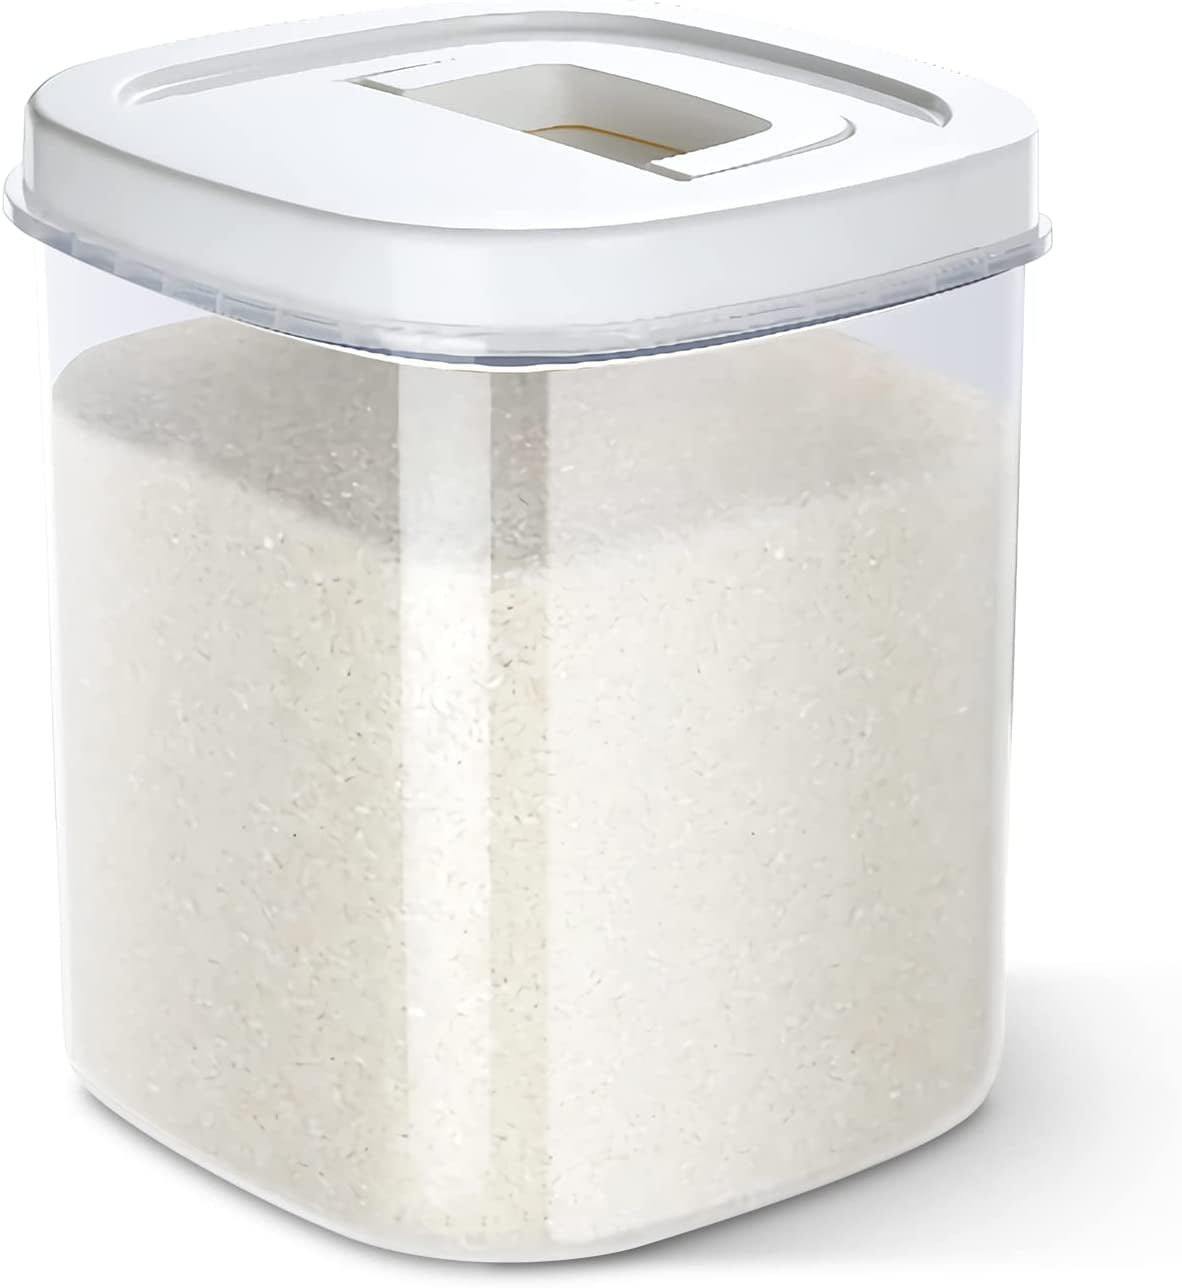 Extra Large Flour and Sugar Containers - 2 Pack 20 Lbs + 10 Lbs